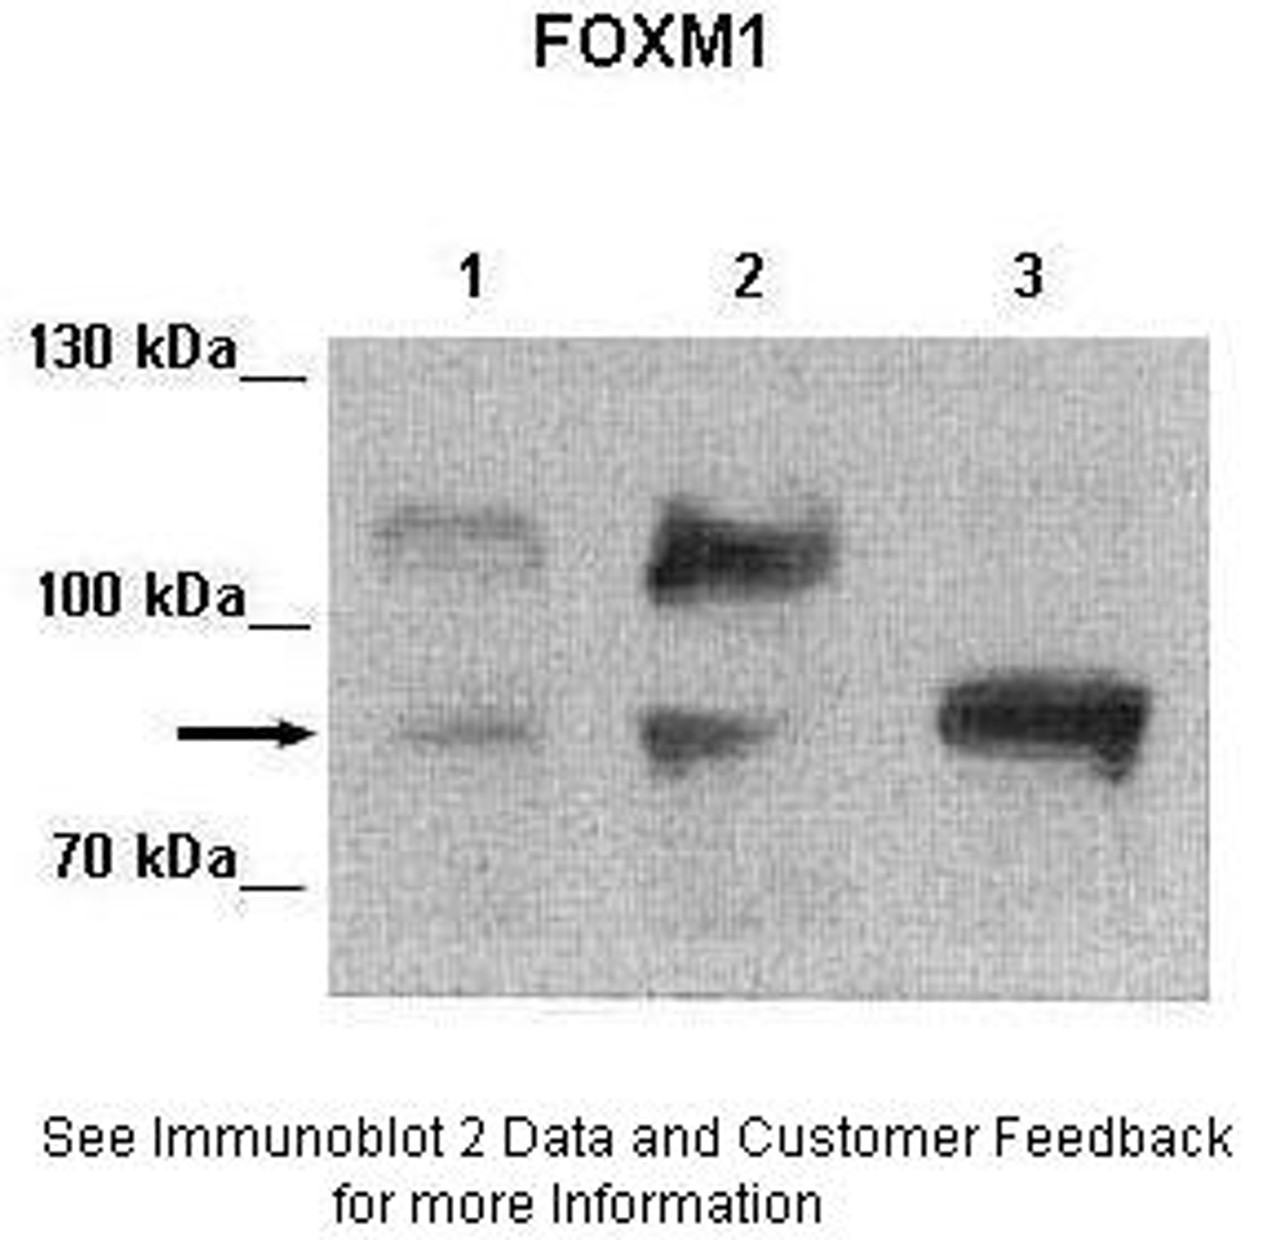 Antibody used in WB on Human cell lines at: 1:2000 (Lane 1: 25ug MIA PaCa-2 human pancreatic cancer cell line, Lane 2: 25ug MDA-MB-231 cell lysate, Lane 3: 25ug Huh-7 cell lysate) .